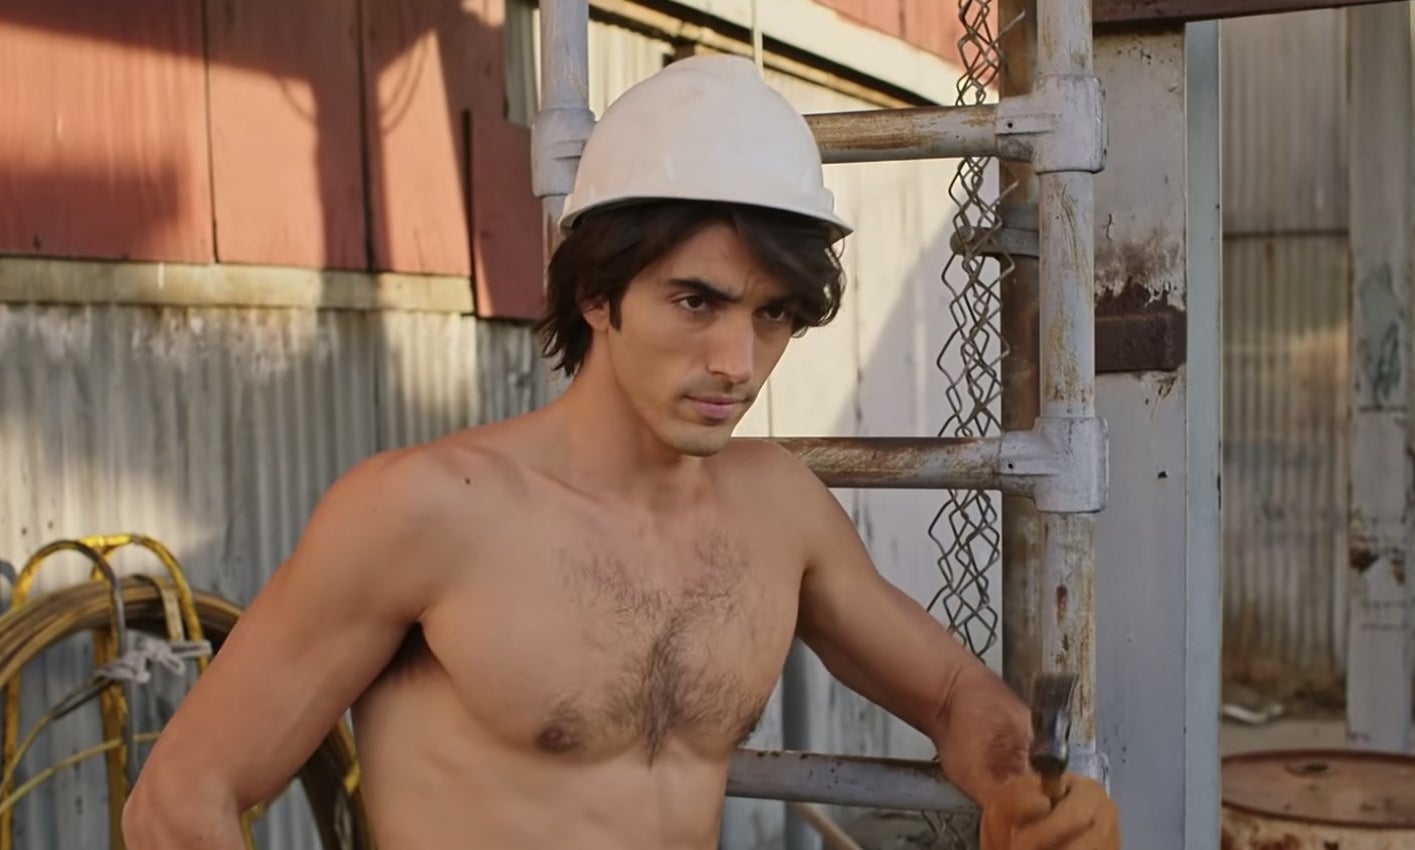 Taylor Zakhar Perez shirtless with a white hardhat on.